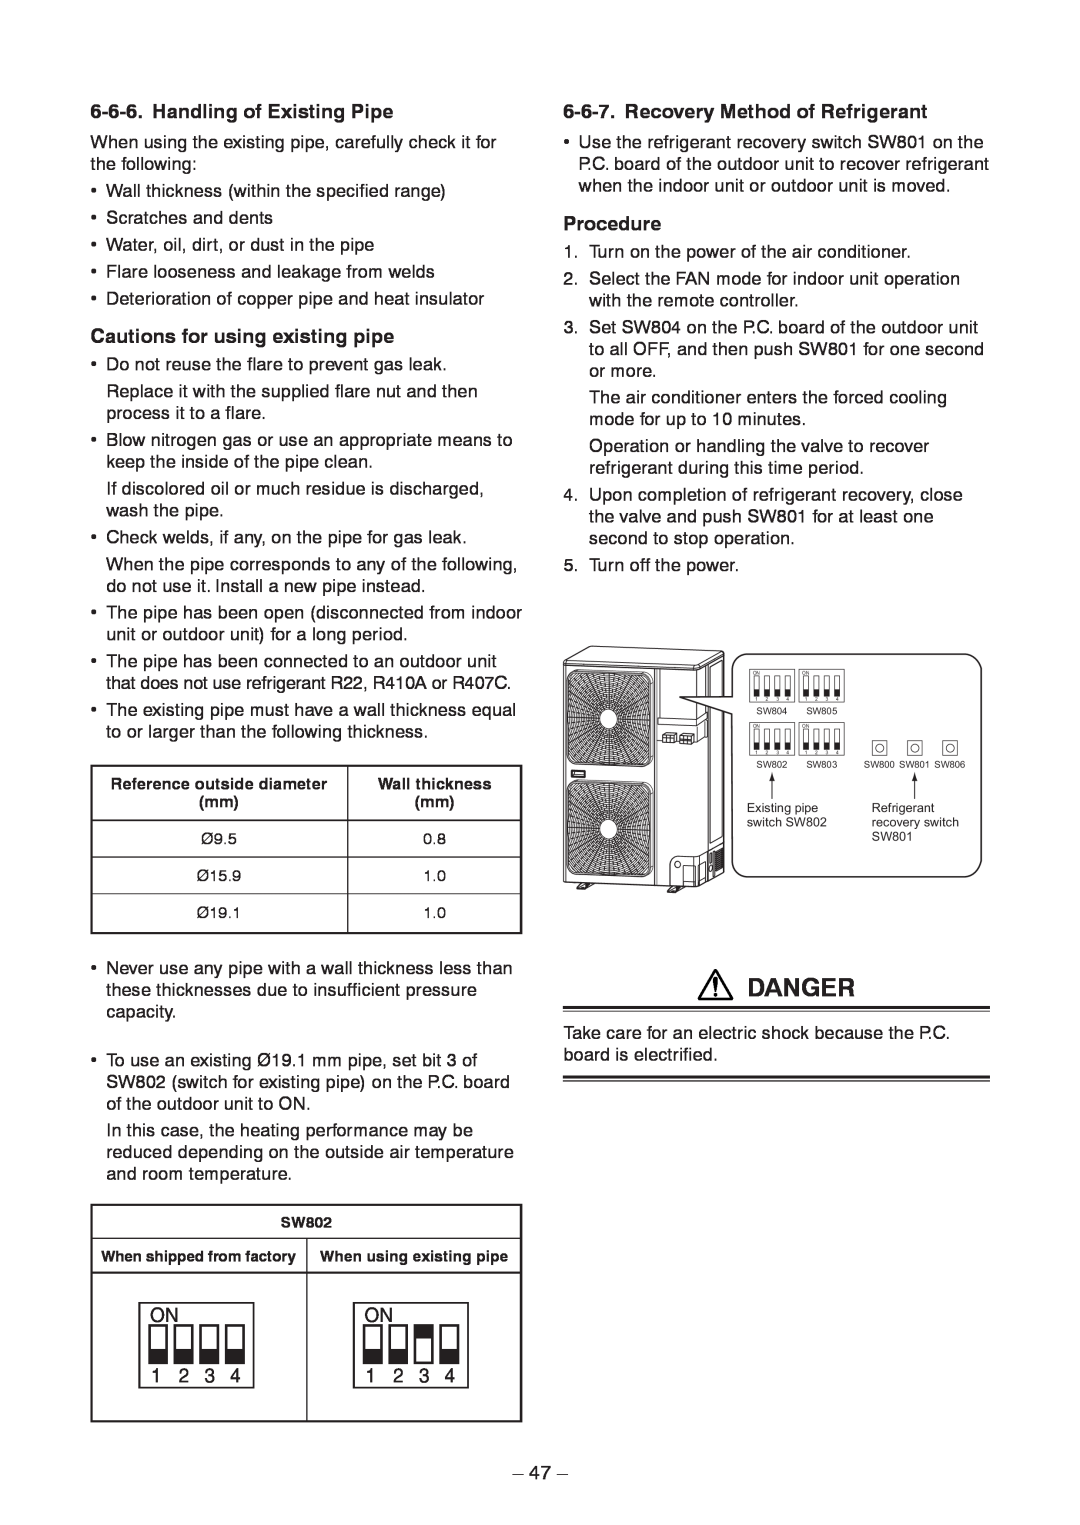 Toshiba RAV-SP1604AT8Z-E service manual Danger, Handling of Existing Pipe, Cautions for using existing pipe, Procedure, 47 